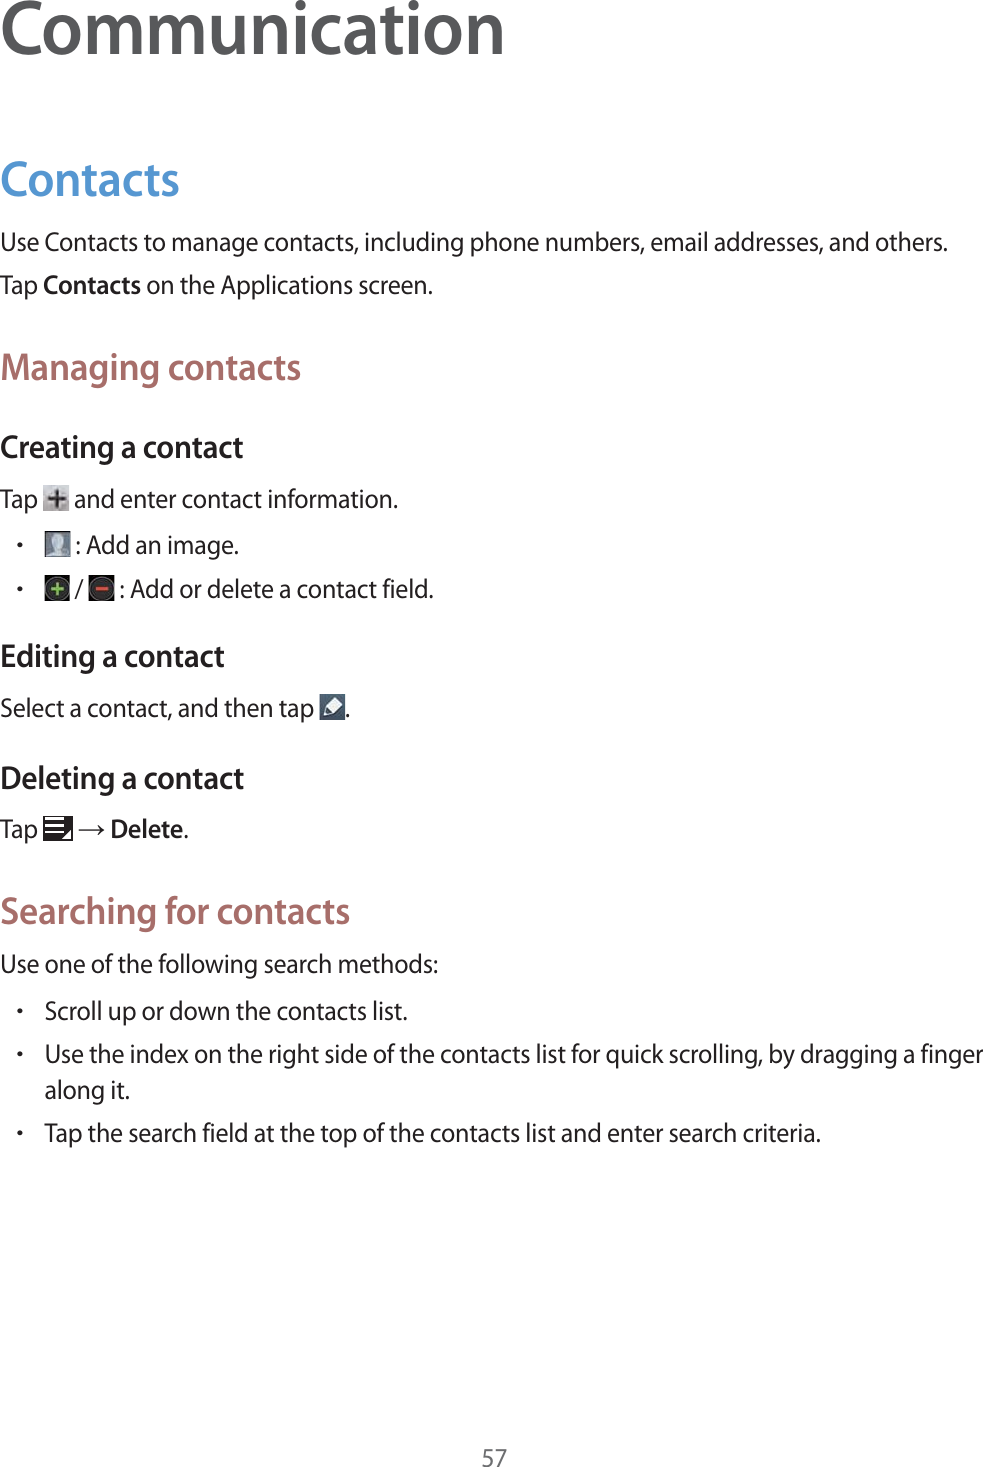 57CommunicationContactsUse Contacts to manage contacts, including phone numbers, email addresses, and others.Tap Contacts on the Applications screen.Managing contactsCreating a contactTap   and enter contact information.r: Add an image.r /  : Add or delete a contact field.Editing a contactSelect a contact, and then tap  .Deleting a contactTap   ĺ Delete.Searching for contactsUse one of the following search methods:rScroll up or down the contacts list.rUse the index on the right side of the contacts list for quick scrolling, by dragging a finger along it.rTap the search field at the top of the contacts list and enter search criteria.